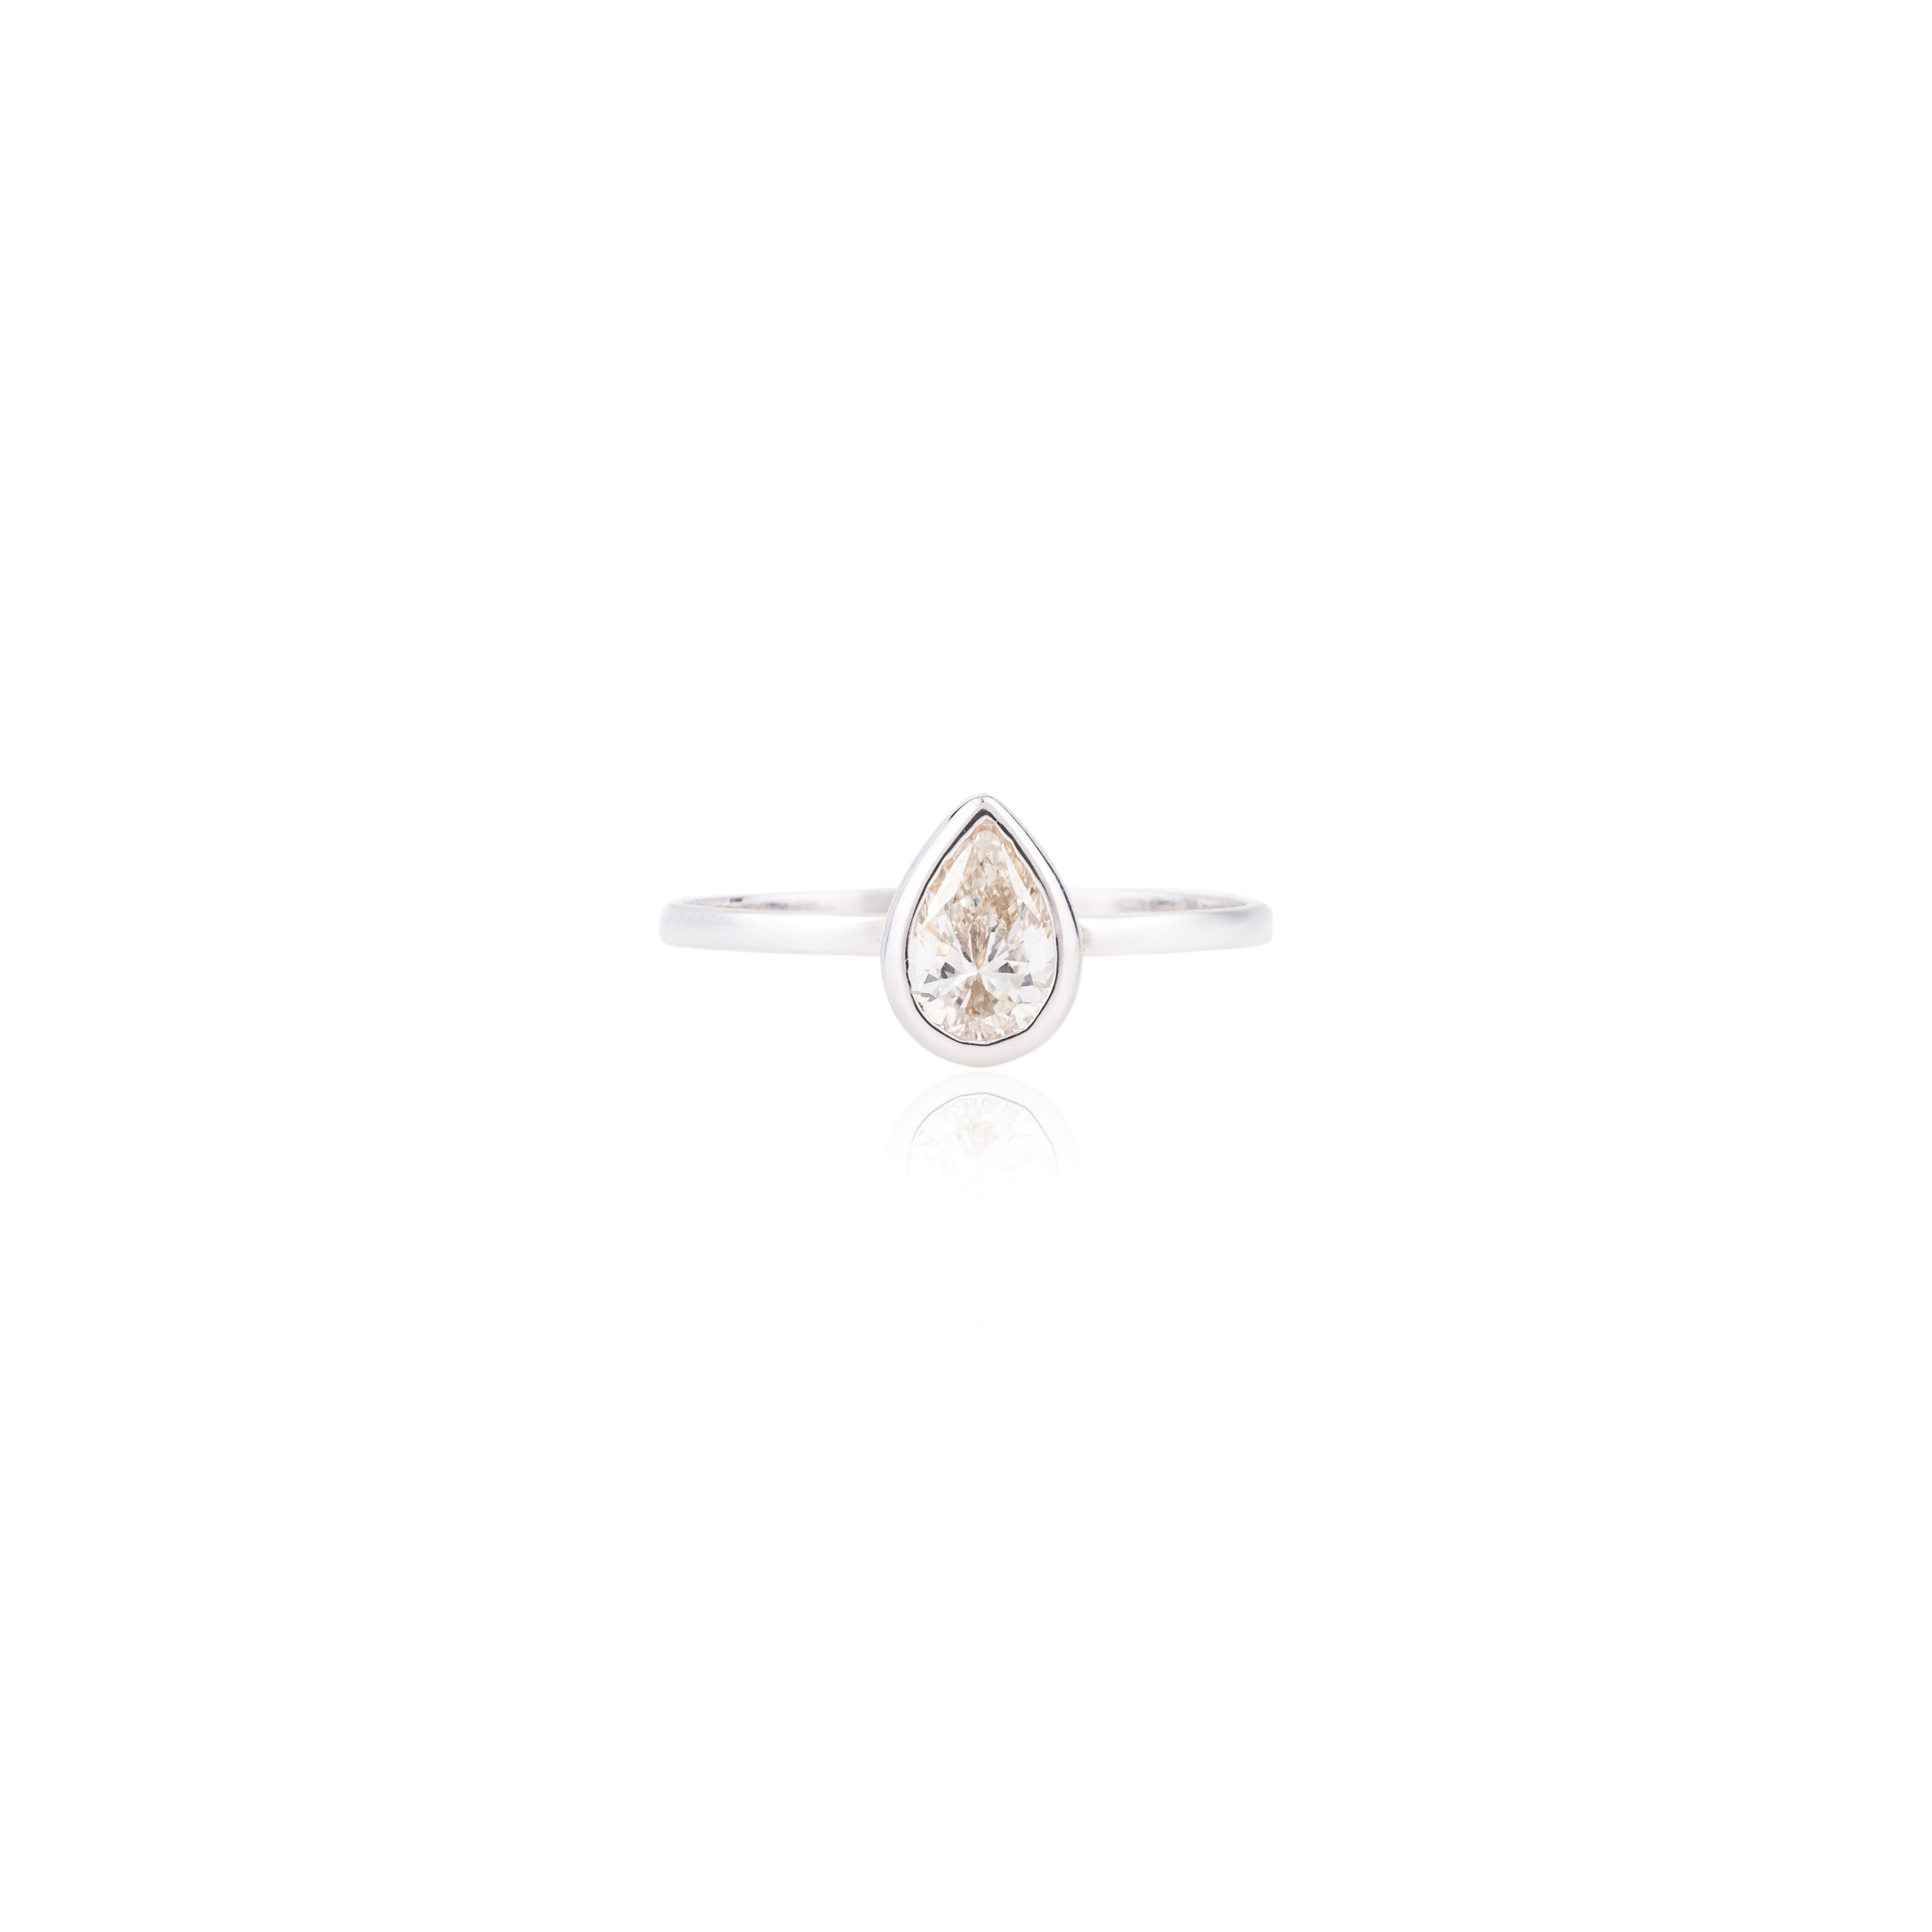 For Sale:  Certified Pear Shape Diamond Solitaire Engagement Ring in 18k White Gold 3